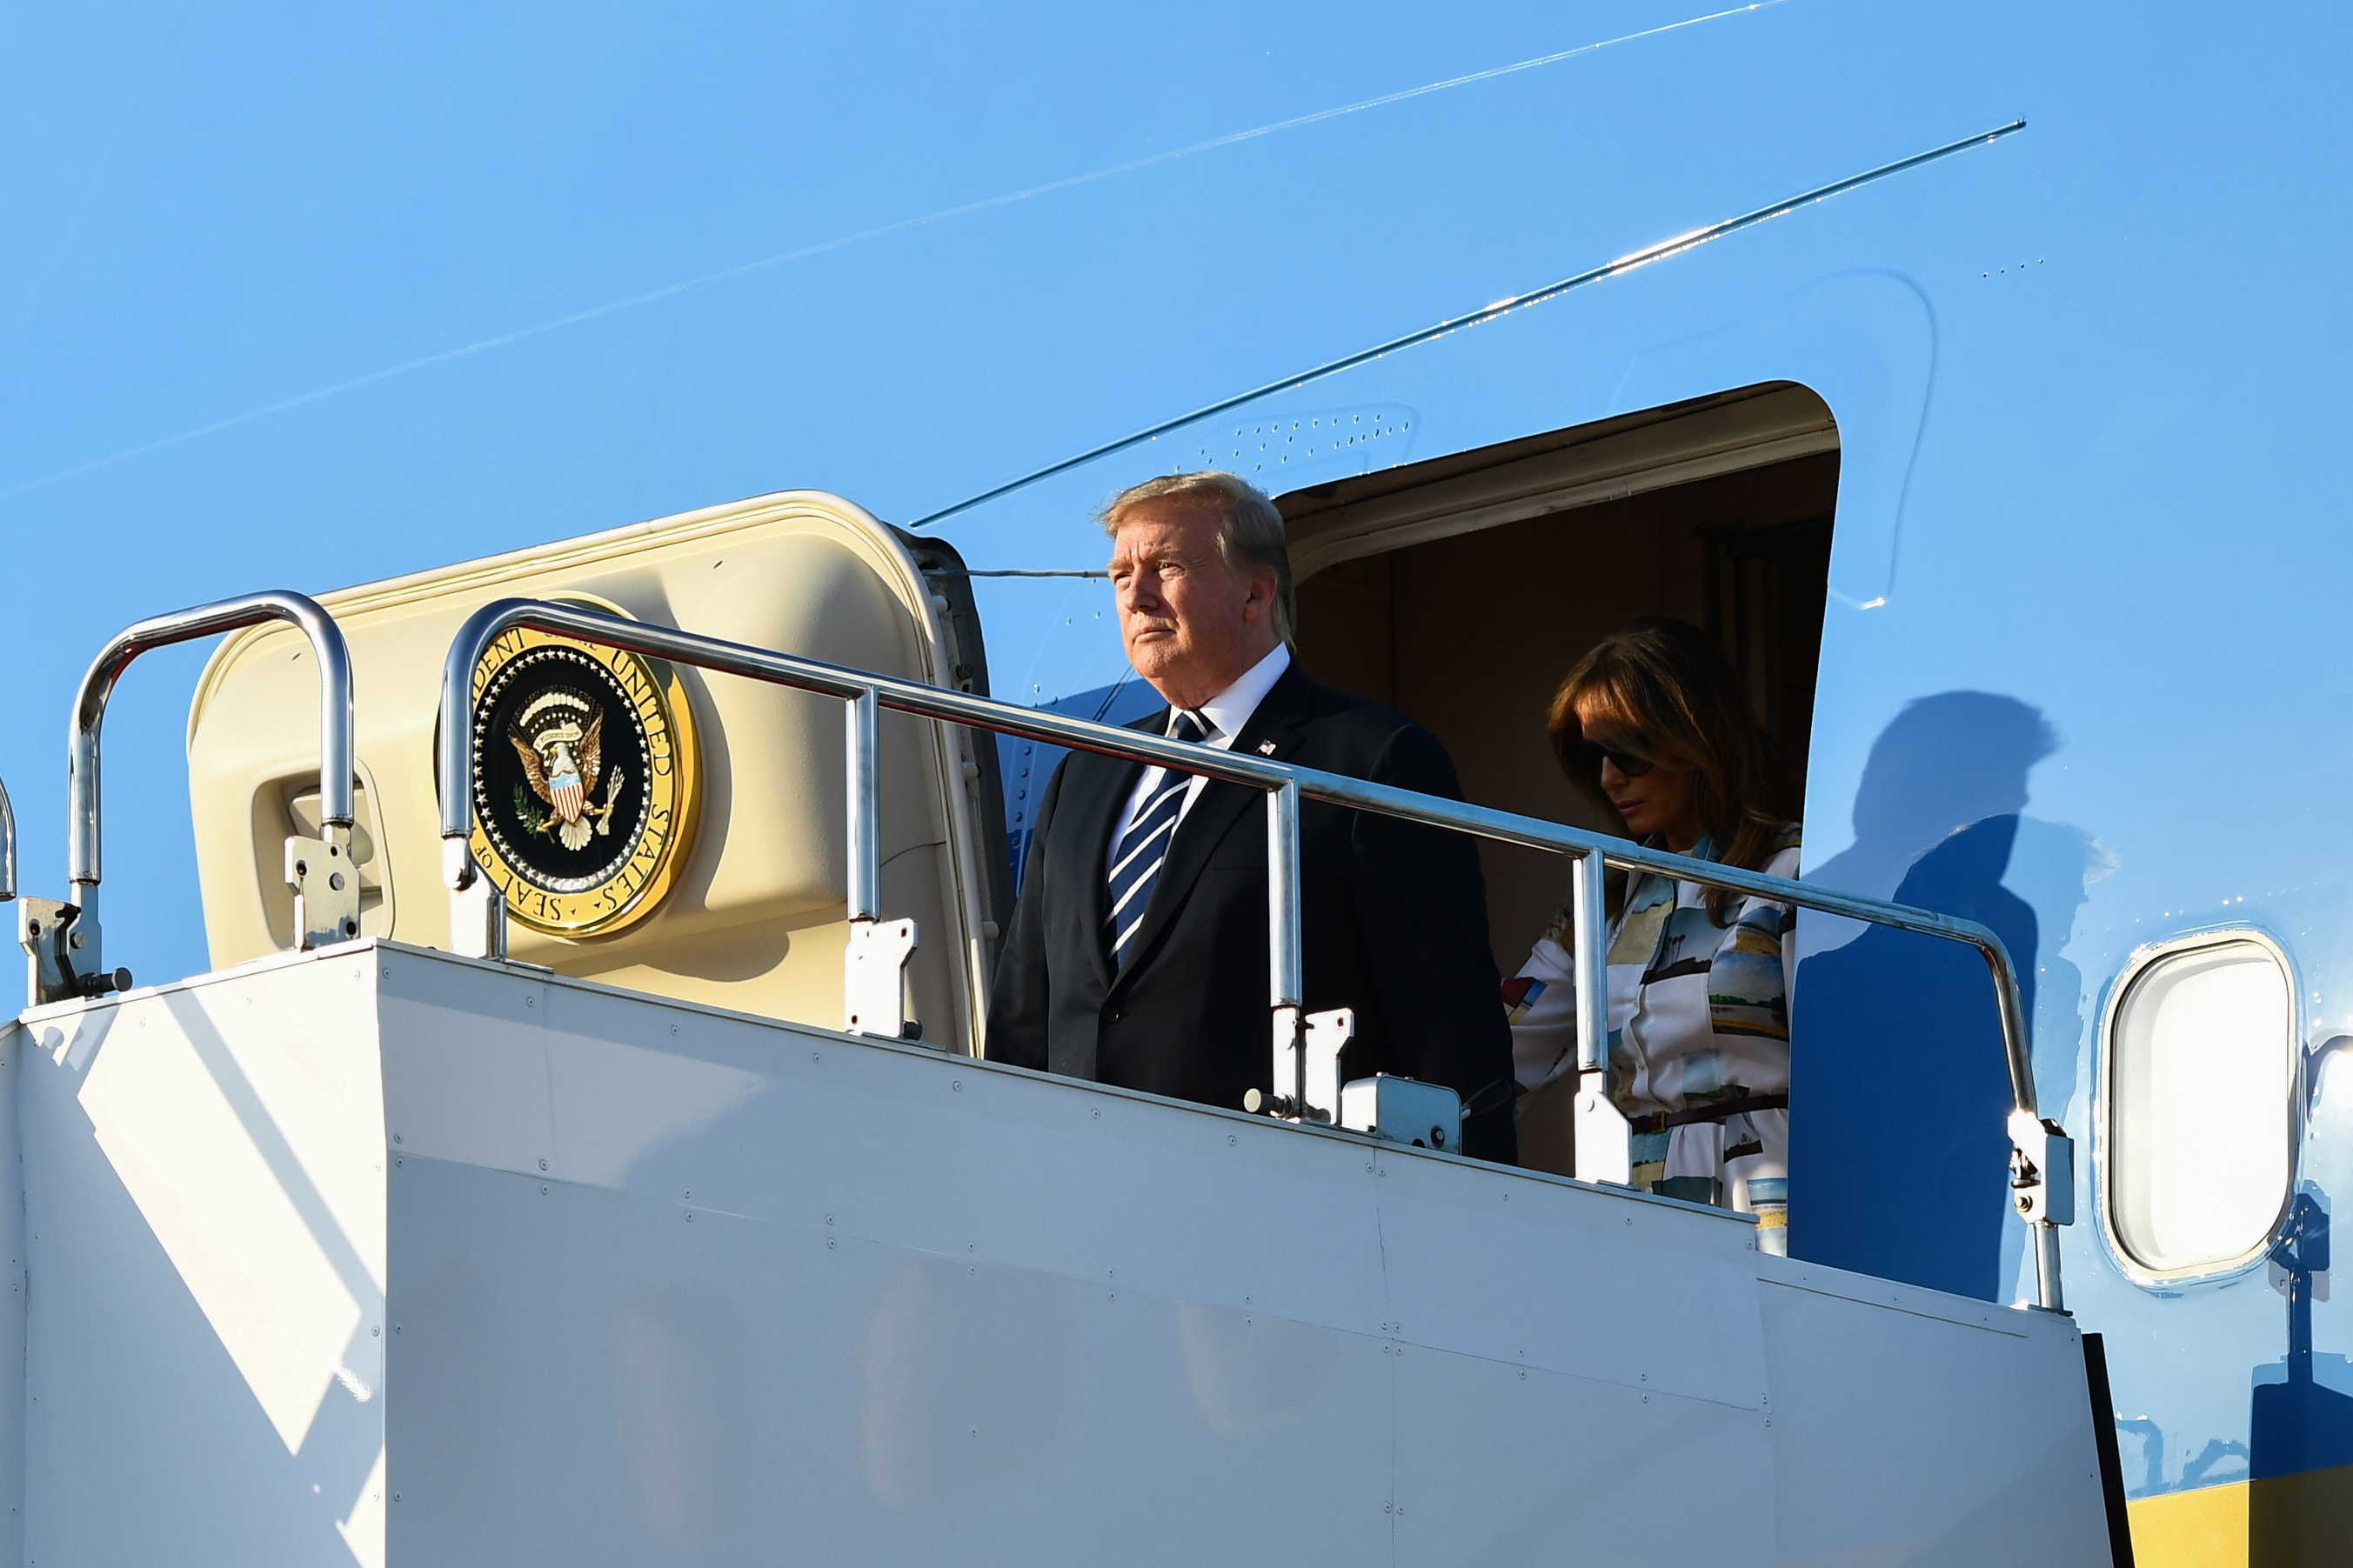 US President Donald Trump disembarking from Air Force One.